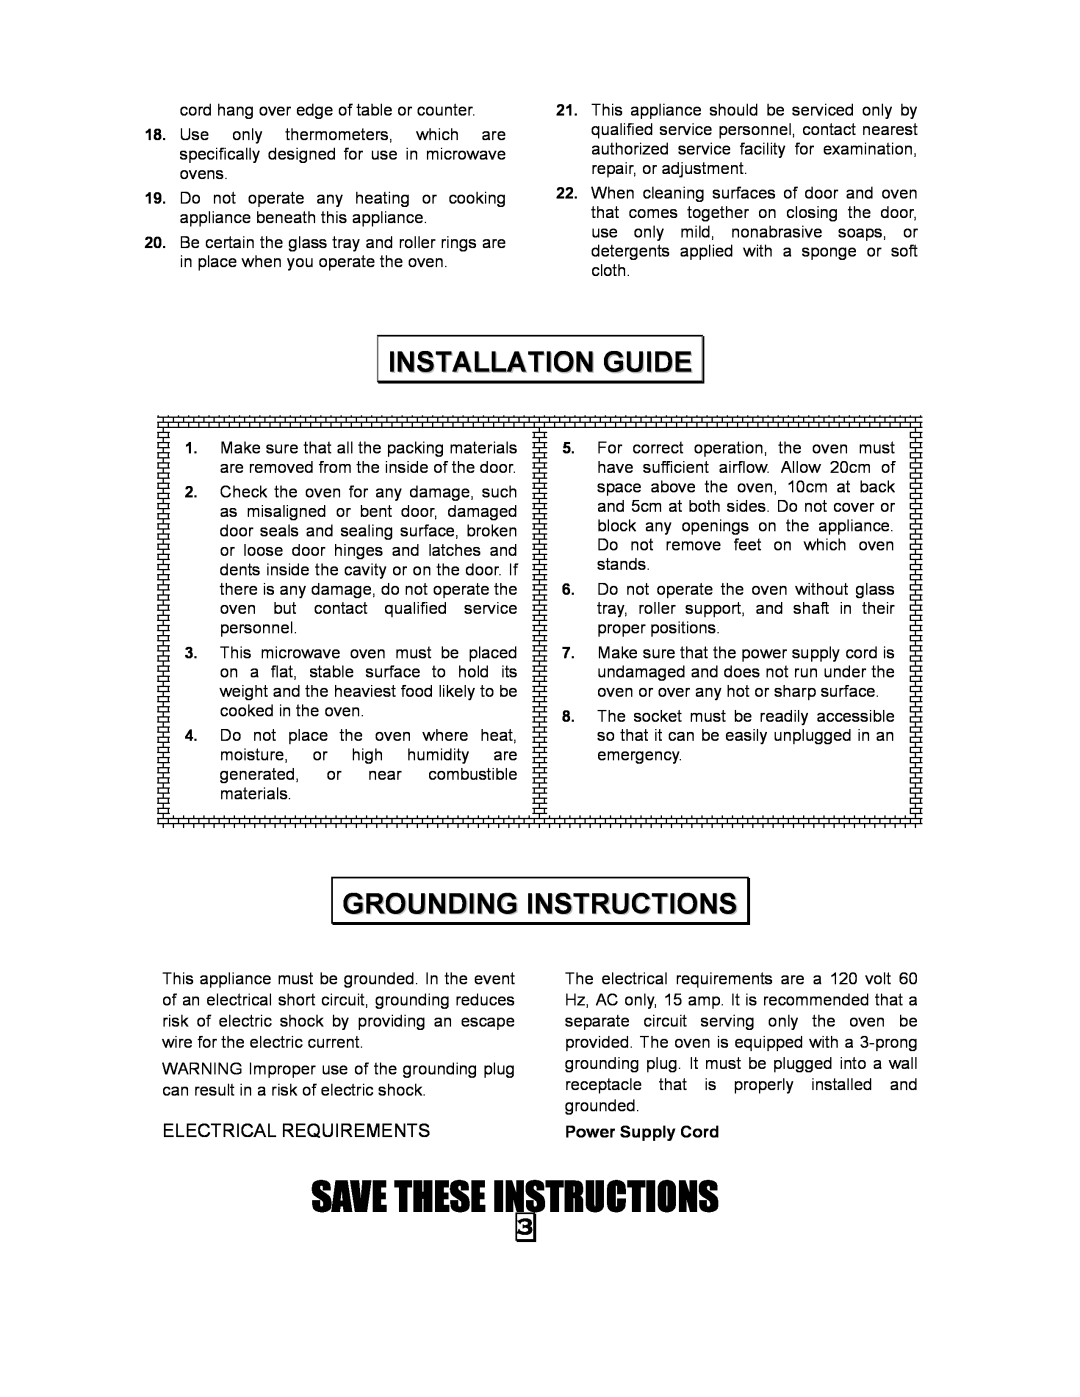 Kenmore 87090 owner manual Installation Guide, Grounding Instructions, Save These Instructions, Electrical Requirements 